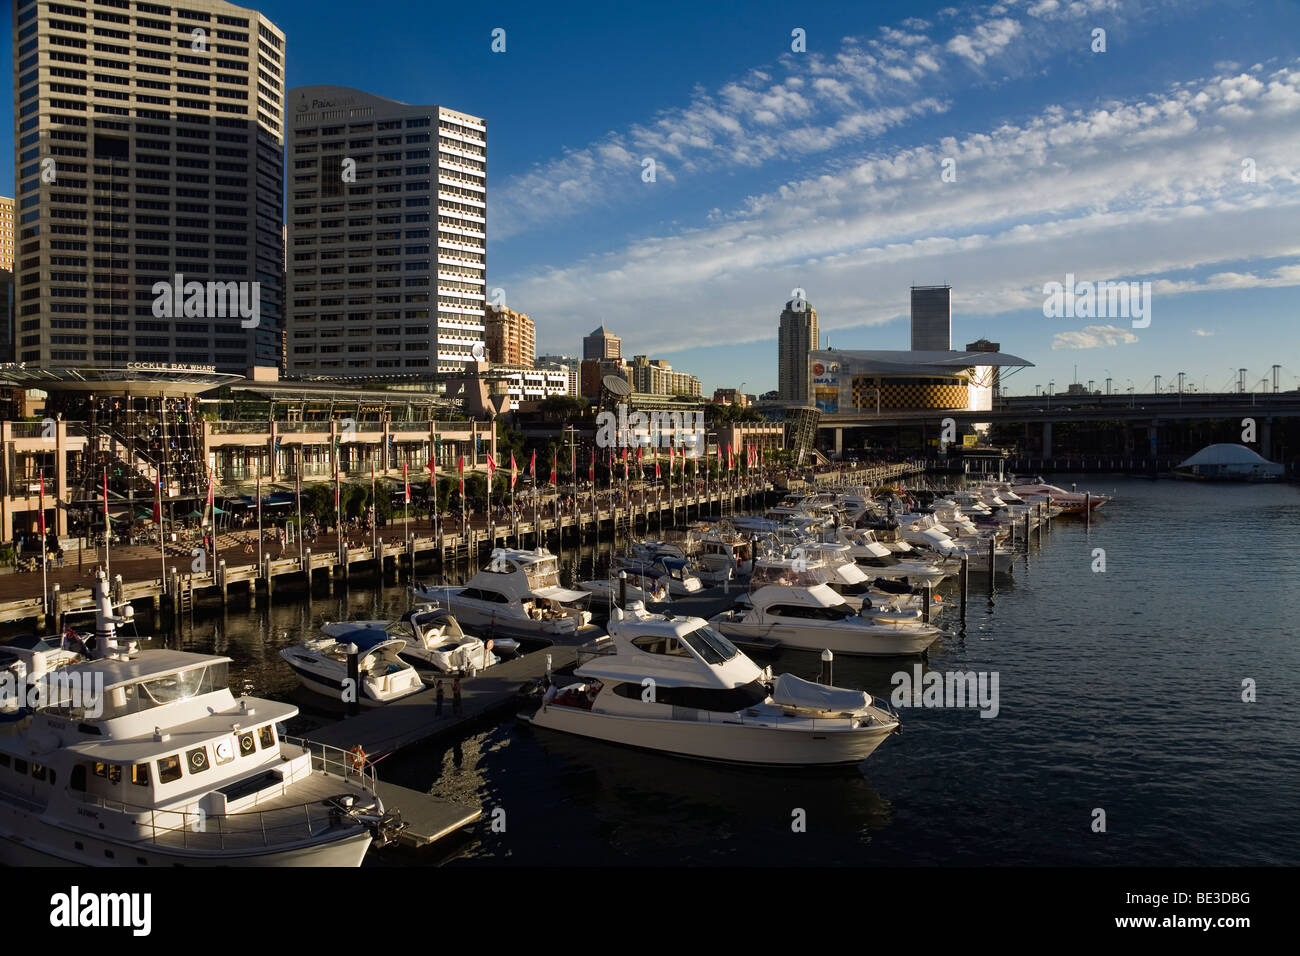 Boat marina at Cockle Bay Wharf in Darling Harbour. Sydney, New South Wales, AUSTRALIA Stock Photo